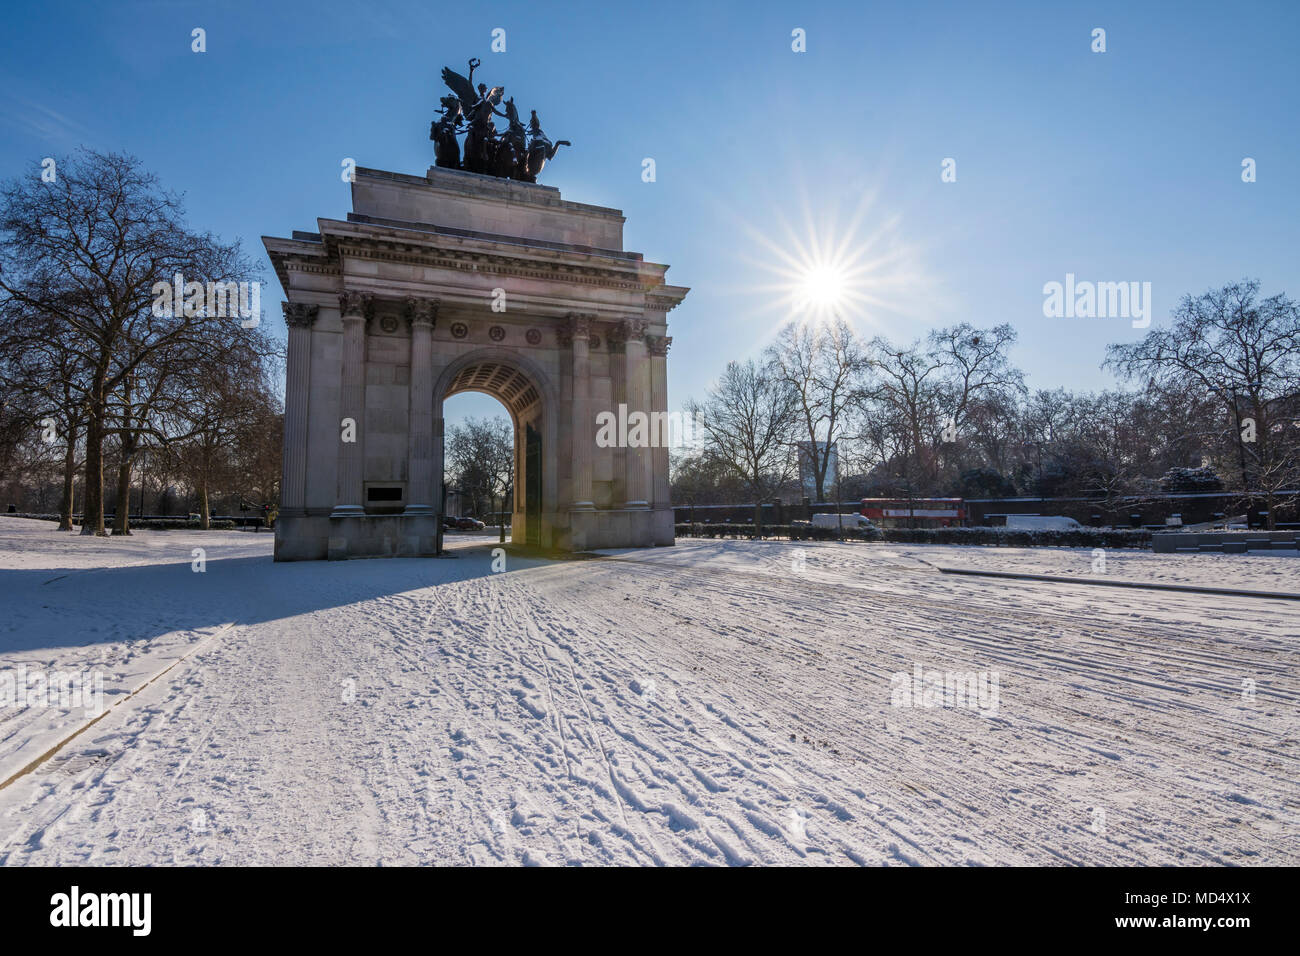 London, UK - February 2, 2018: Snow at constitution hill and Wellington Archp Stock Photo